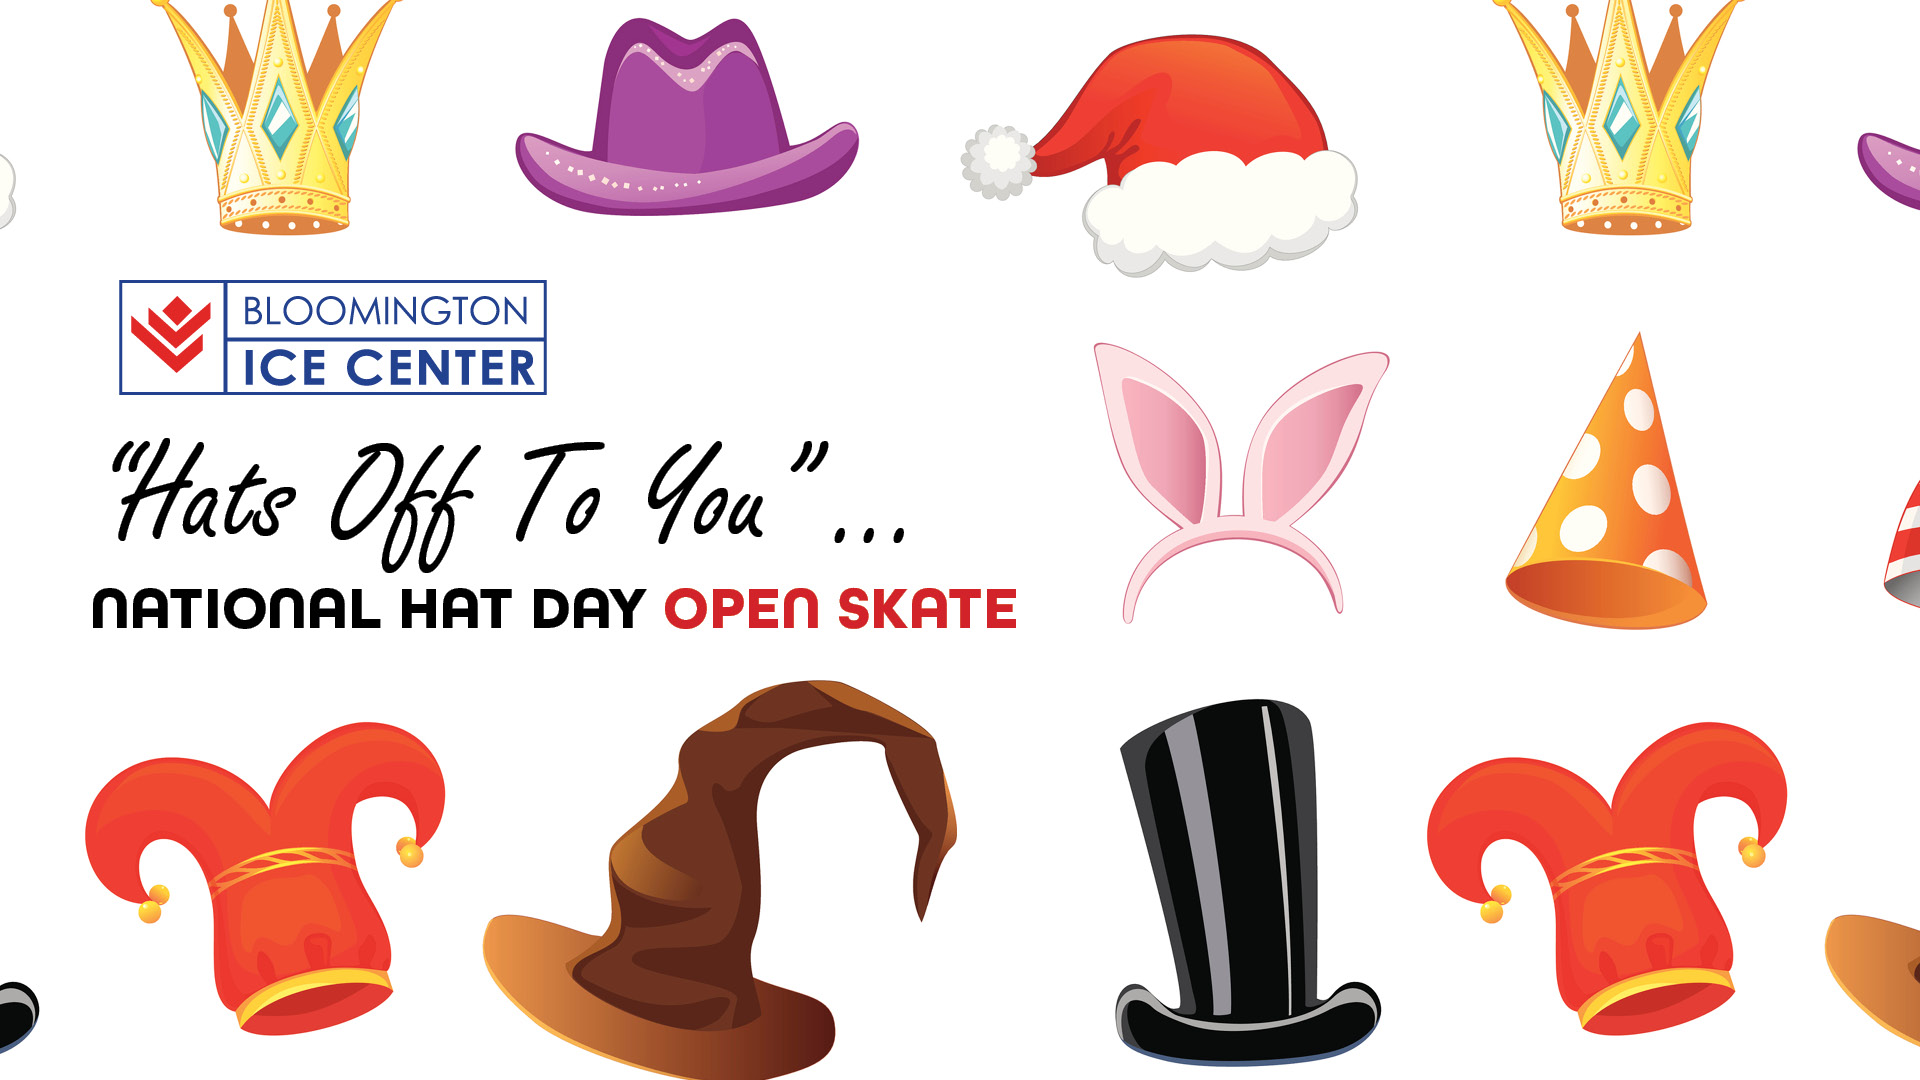 “Hats off to You” -  National Hat Day Open Skate